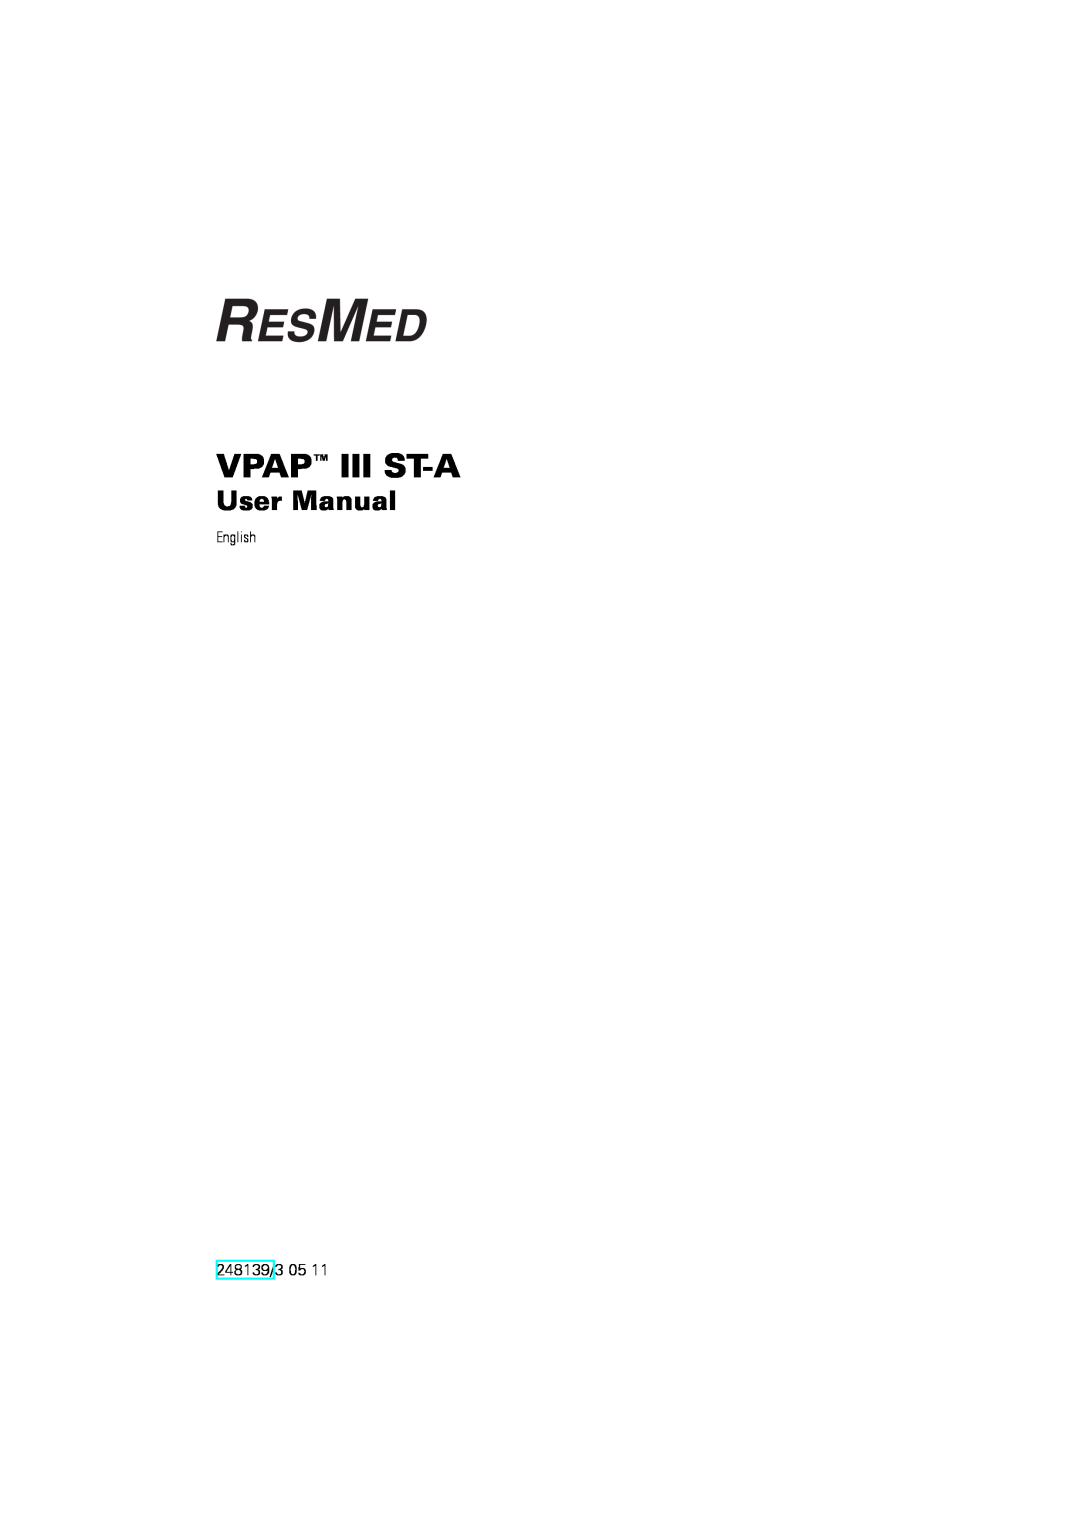 ResMed III ST-A user manual Vpap Iii St-A, 248139/3 